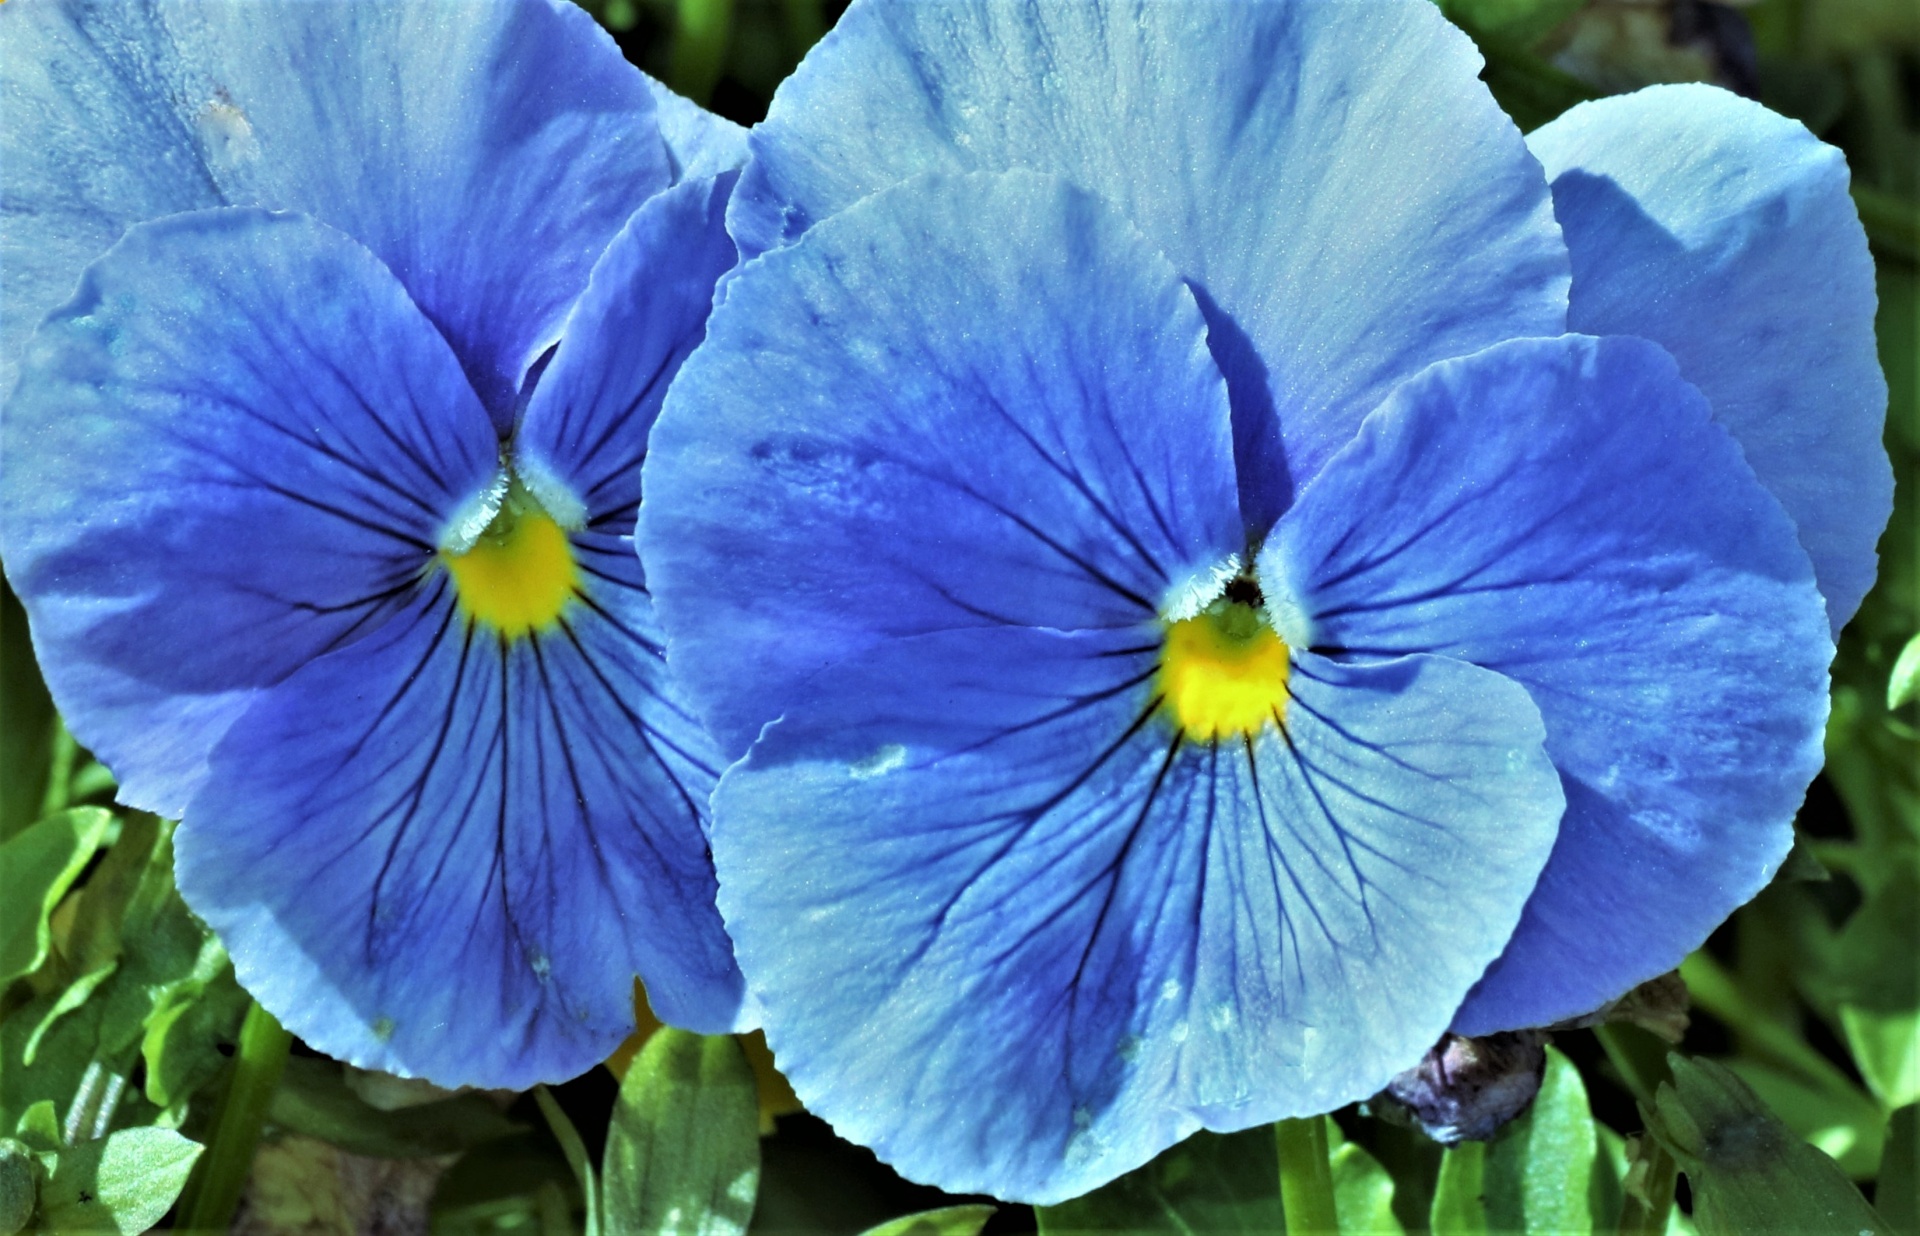 Close-up of two blue pansy flowers on a green background.